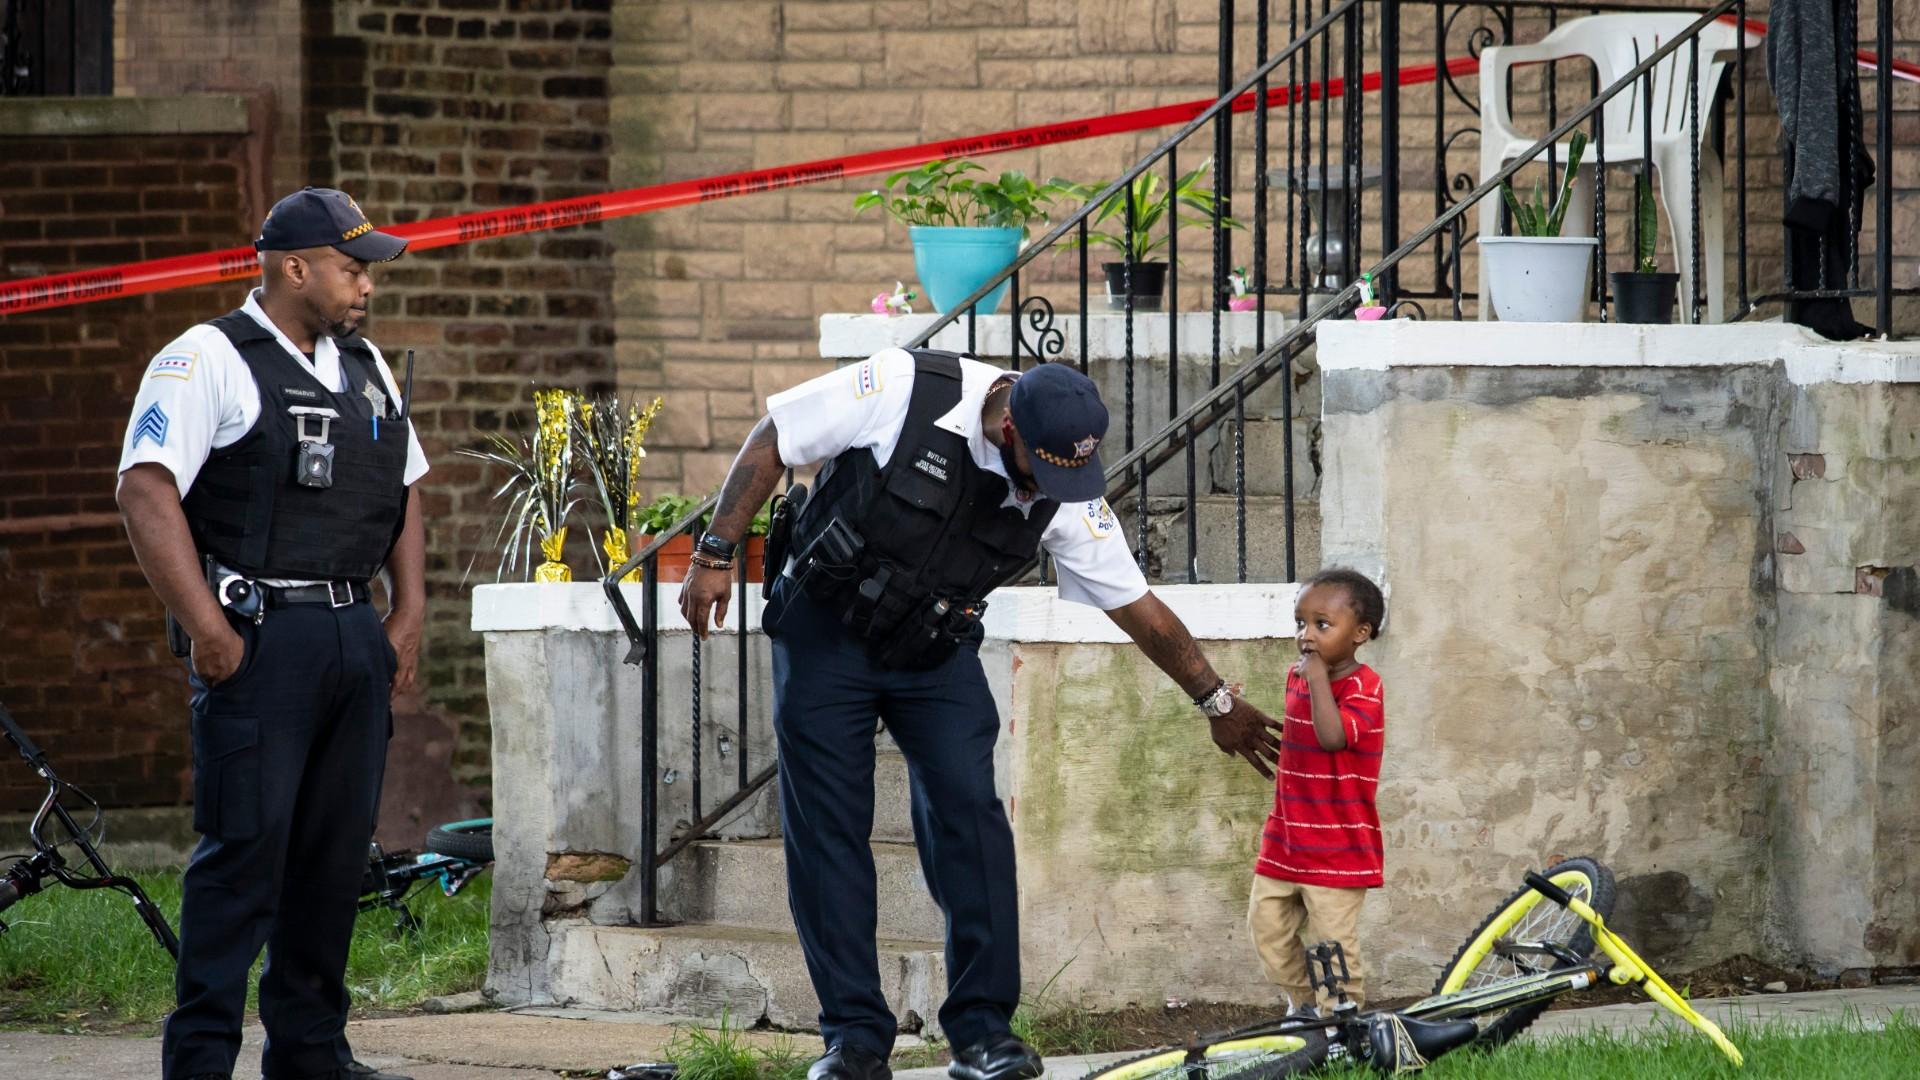 A Chicago police officer helps a child walk through an area being investigated after two men were shot Friday, July 3, 2020, in Chicago. (Ashlee Rezin Garcia / Chicago Sun-Times via AP)